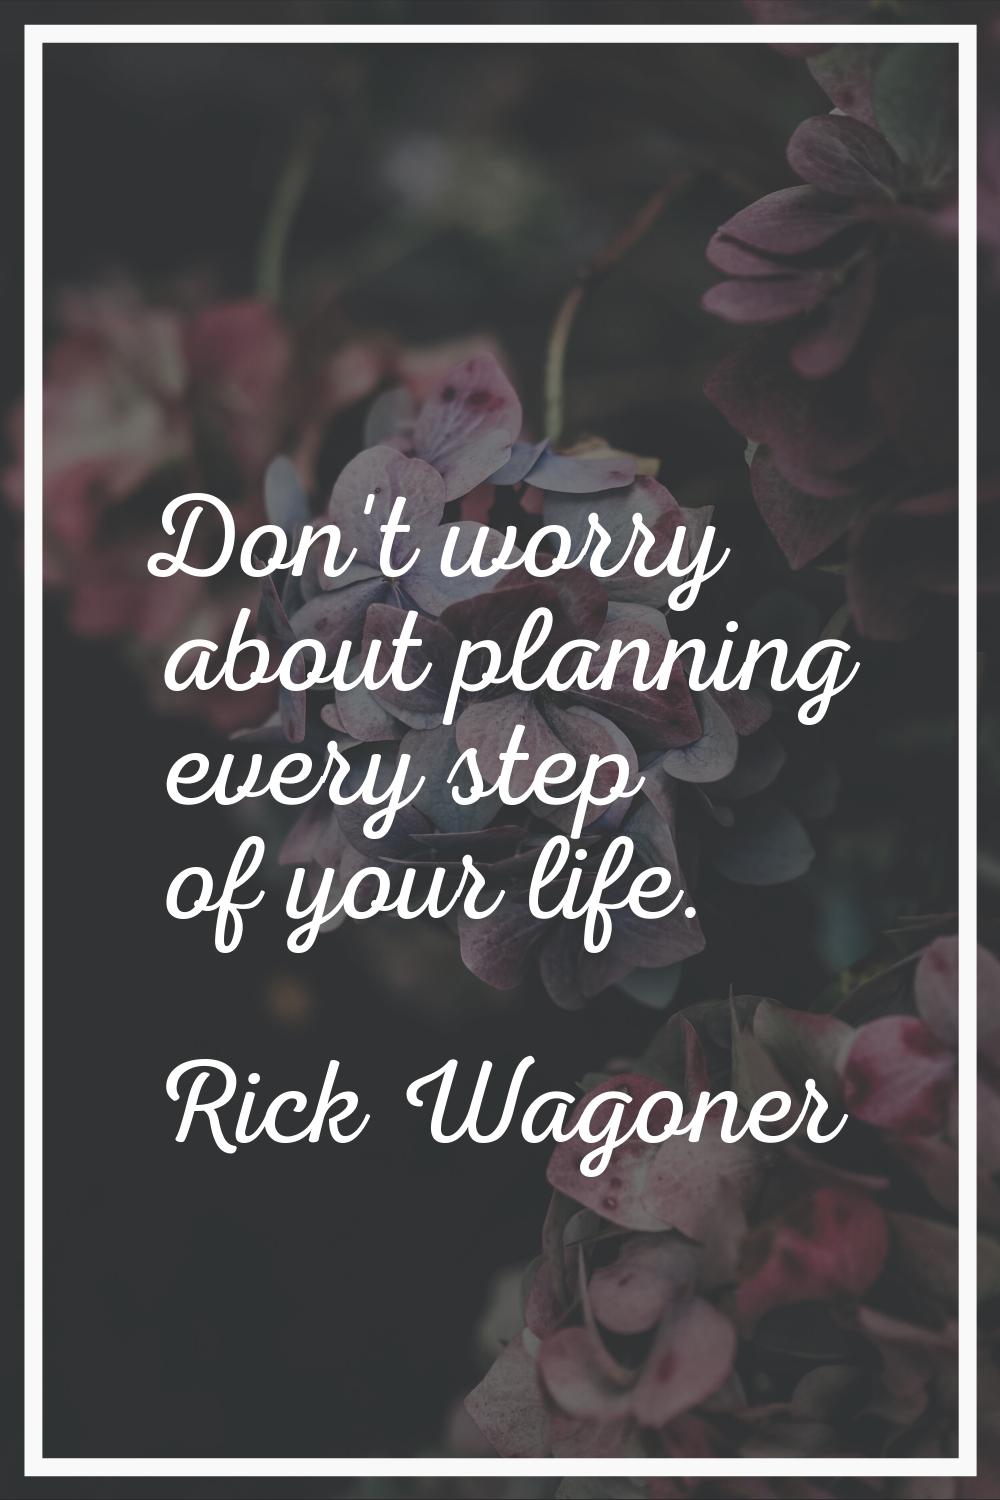 Don't worry about planning every step of your life.